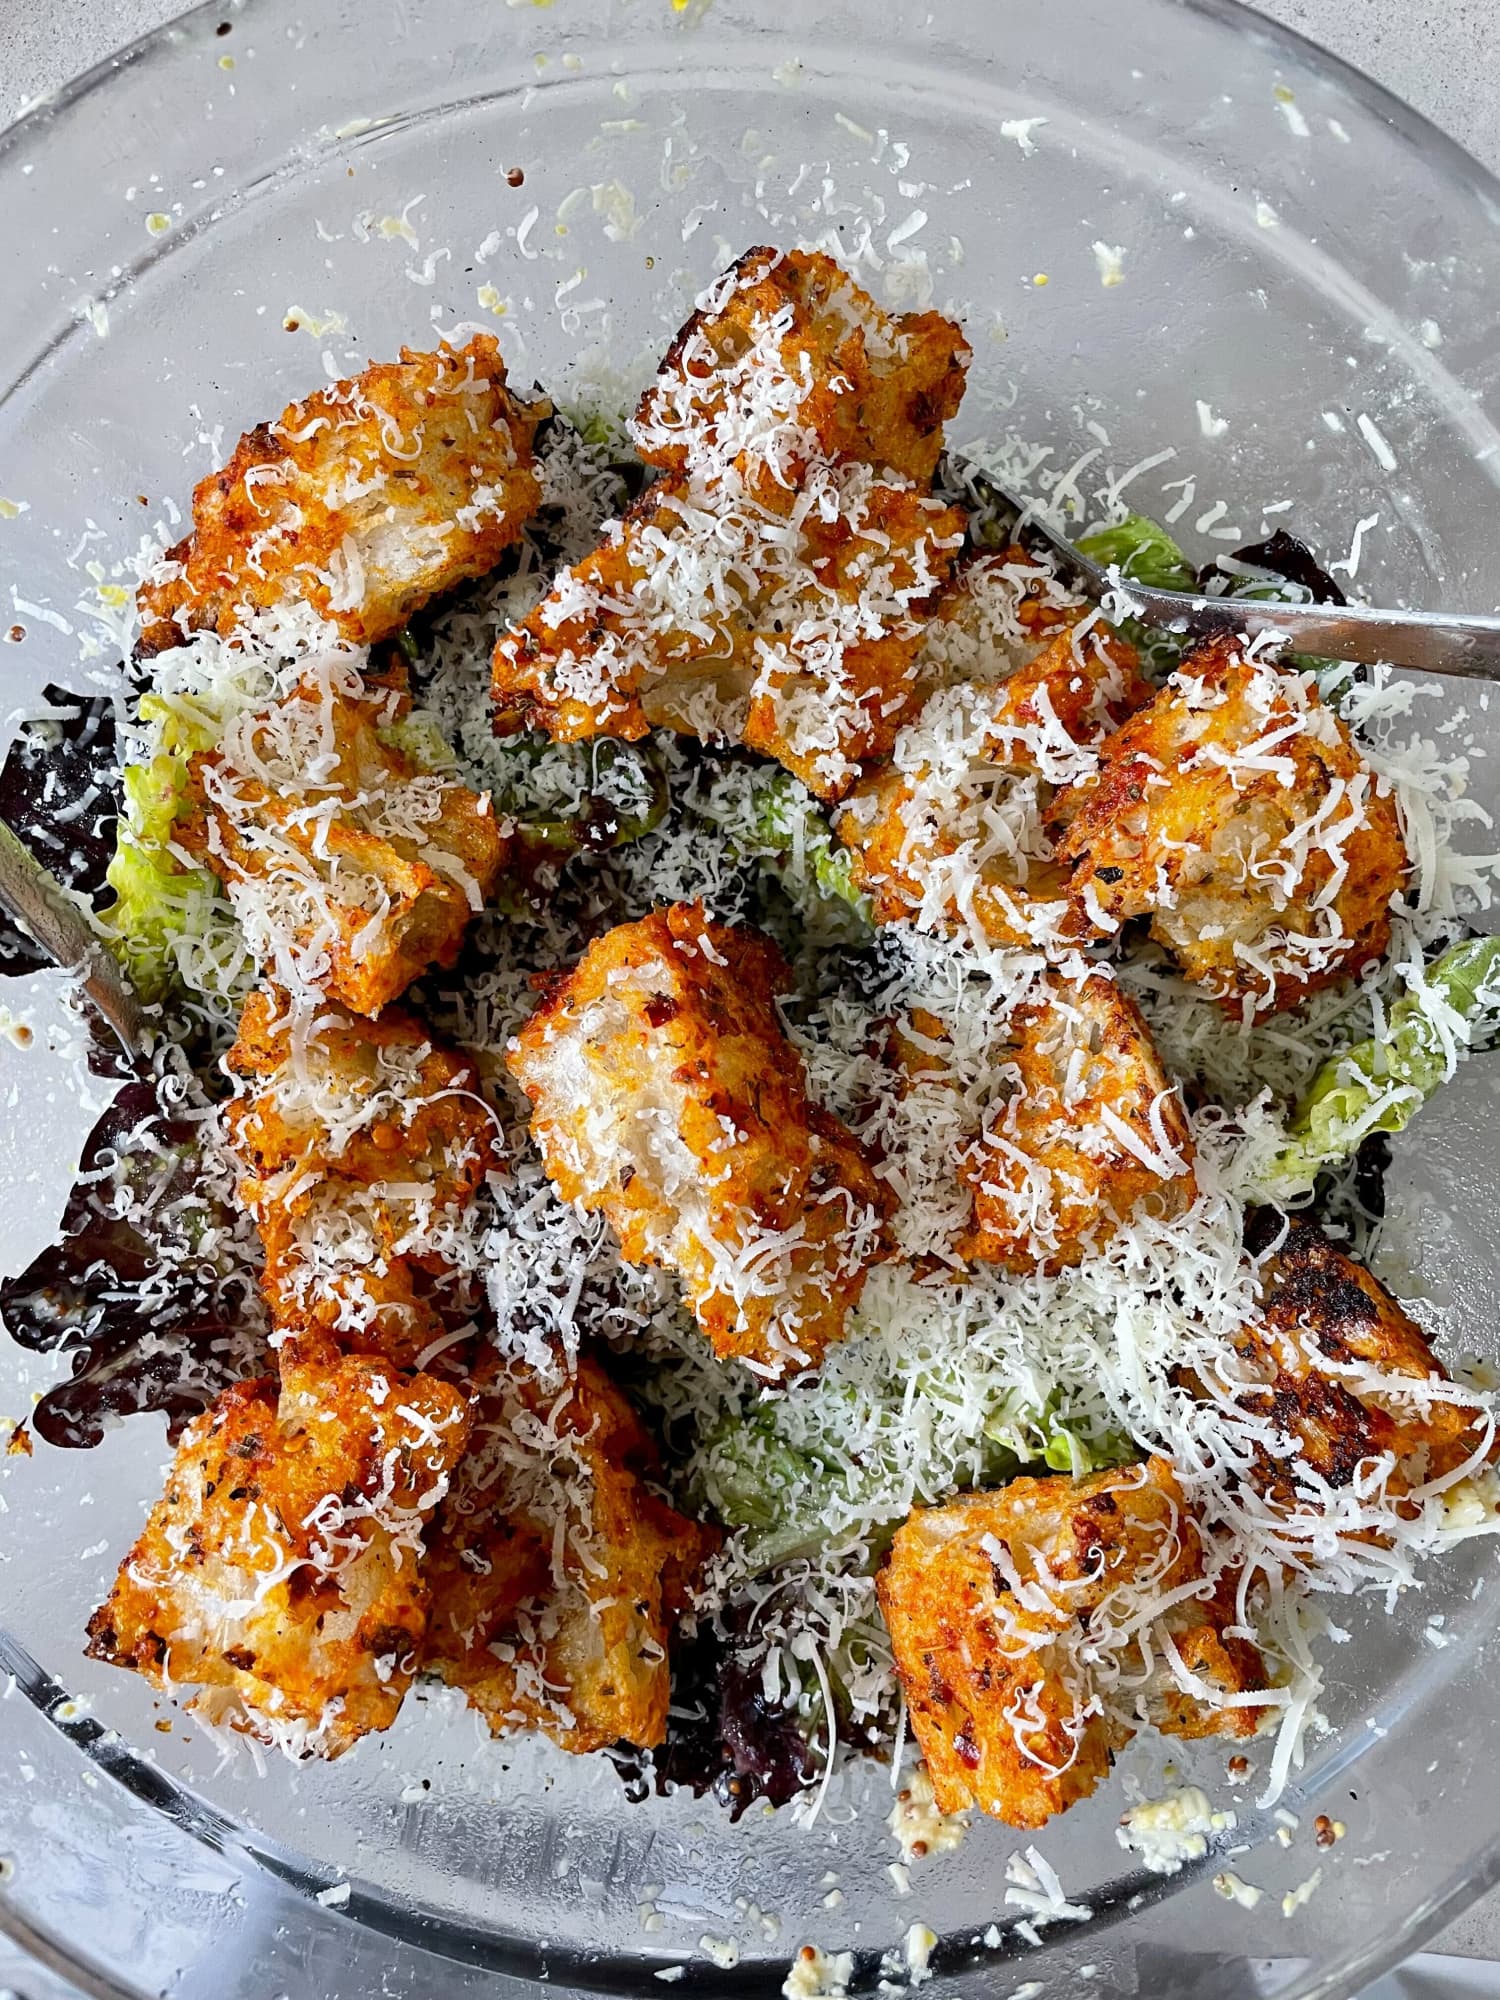 I Tried the Popular Carbone-Style Caesar Salad and I Fully Understand the Hype